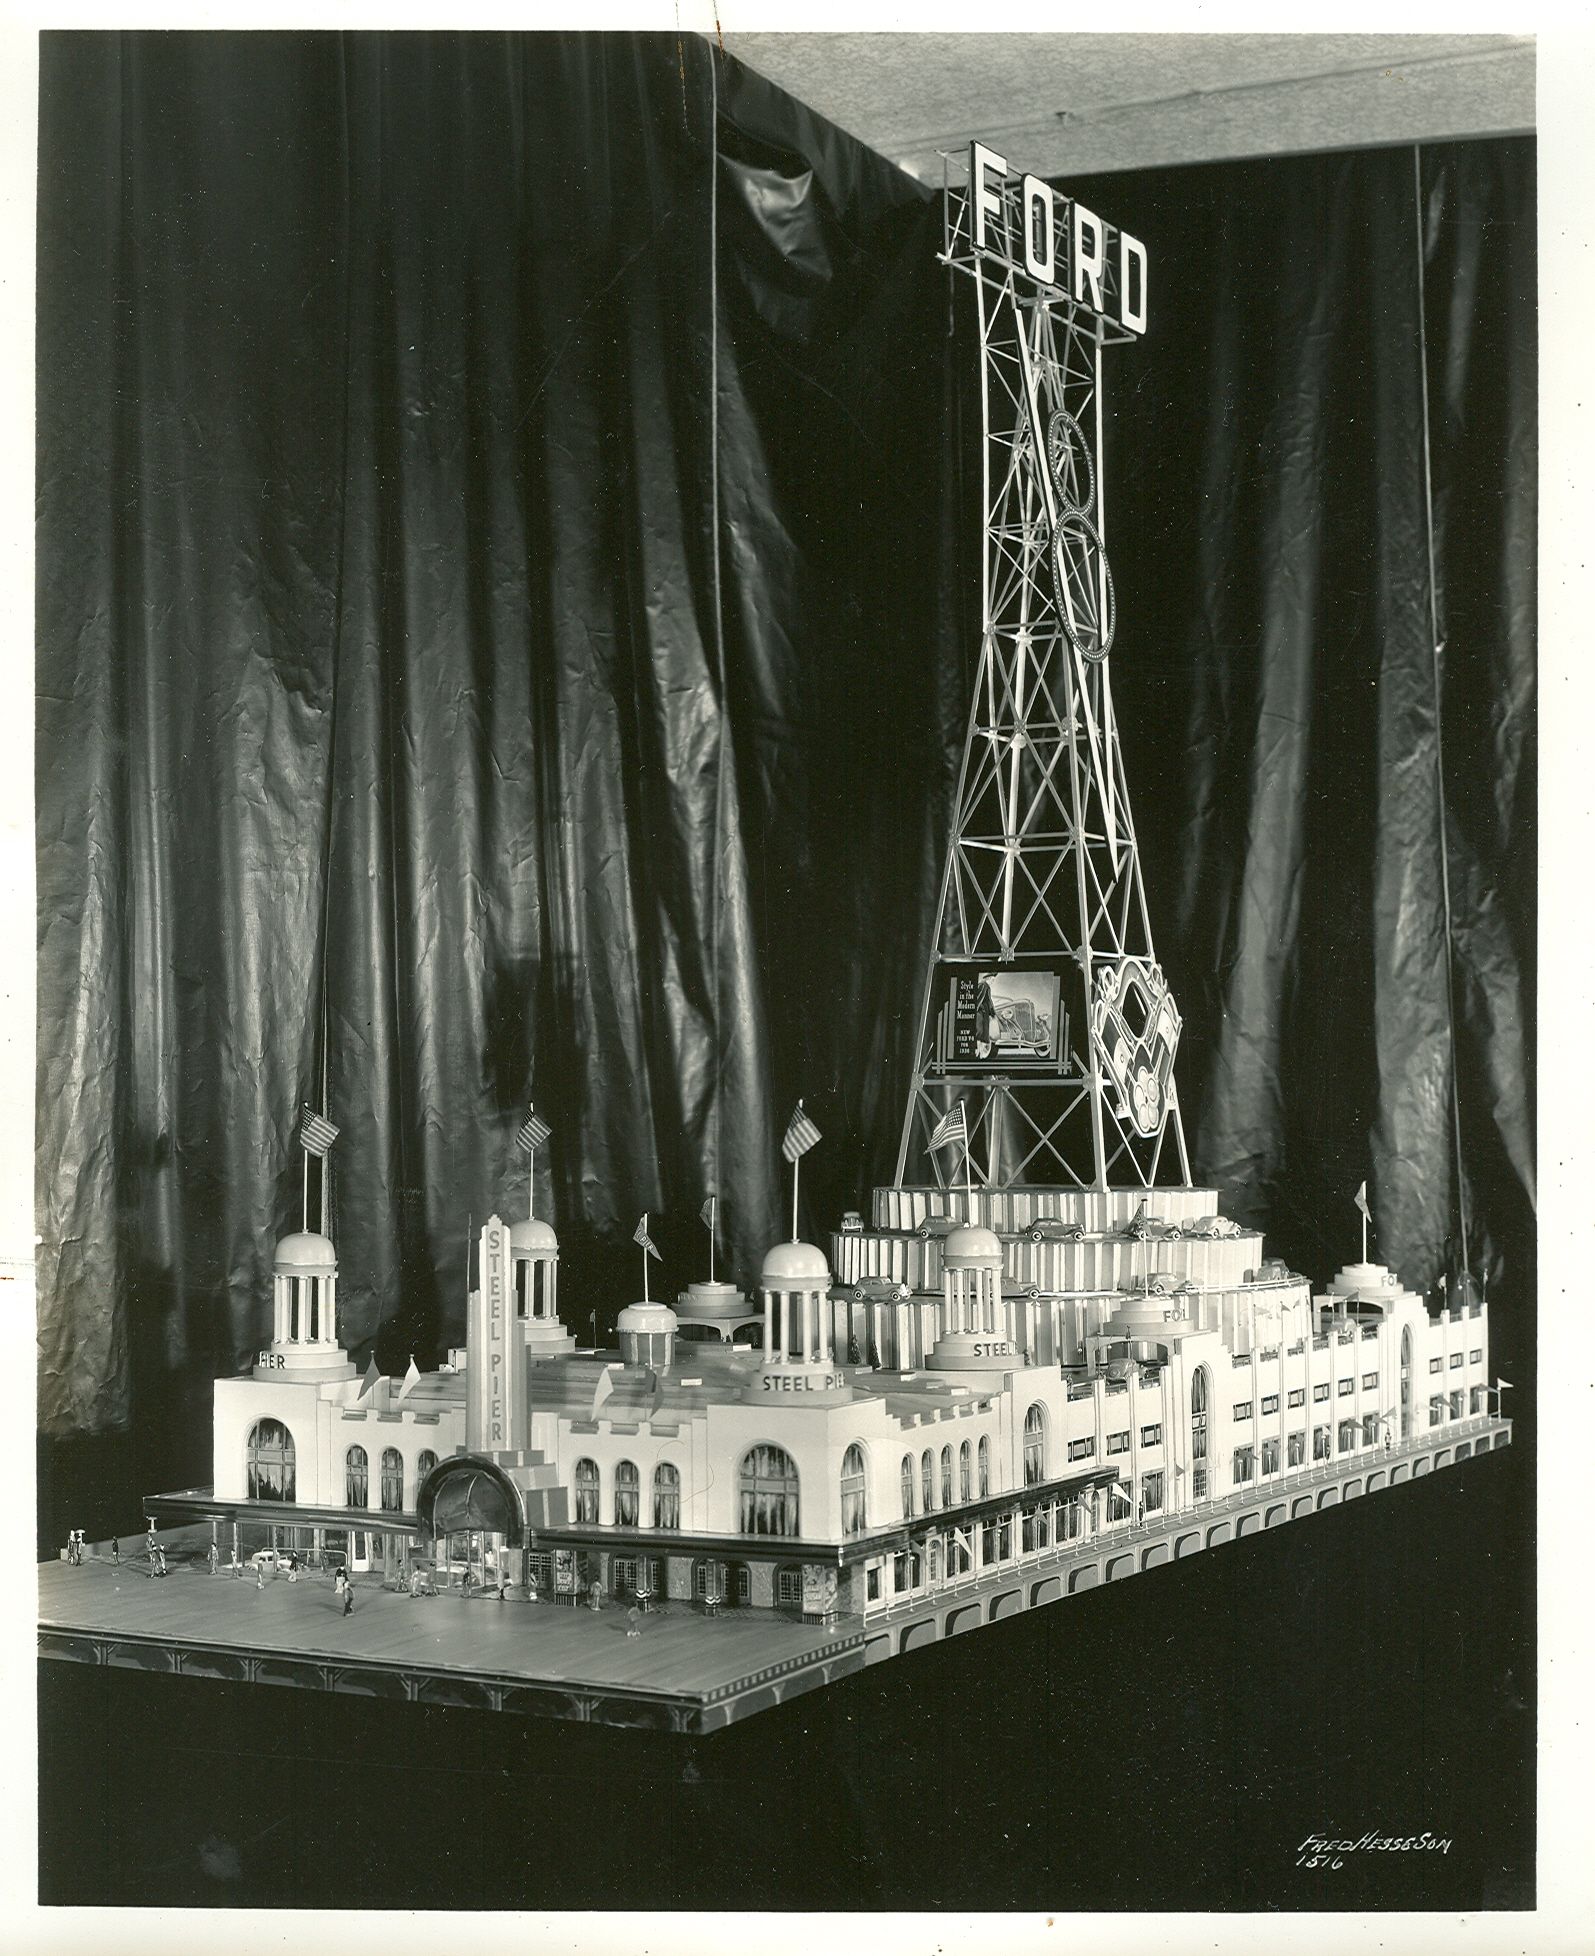 Model of the Steel Pier at Atlantic City with Ford display circa 1940. View full size.